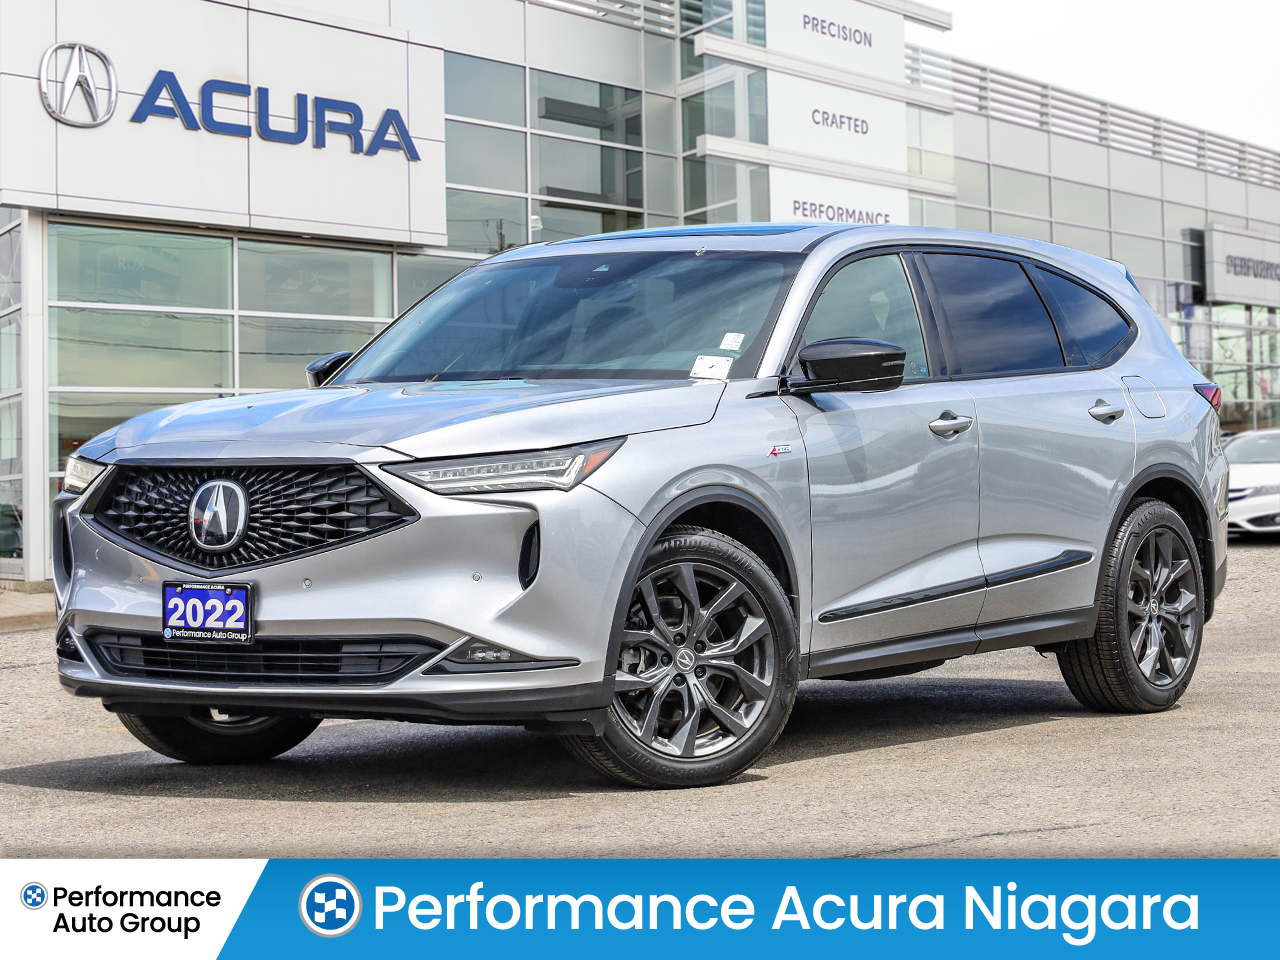 2022 Acura MDX SOLD - PENDING DELIVERY